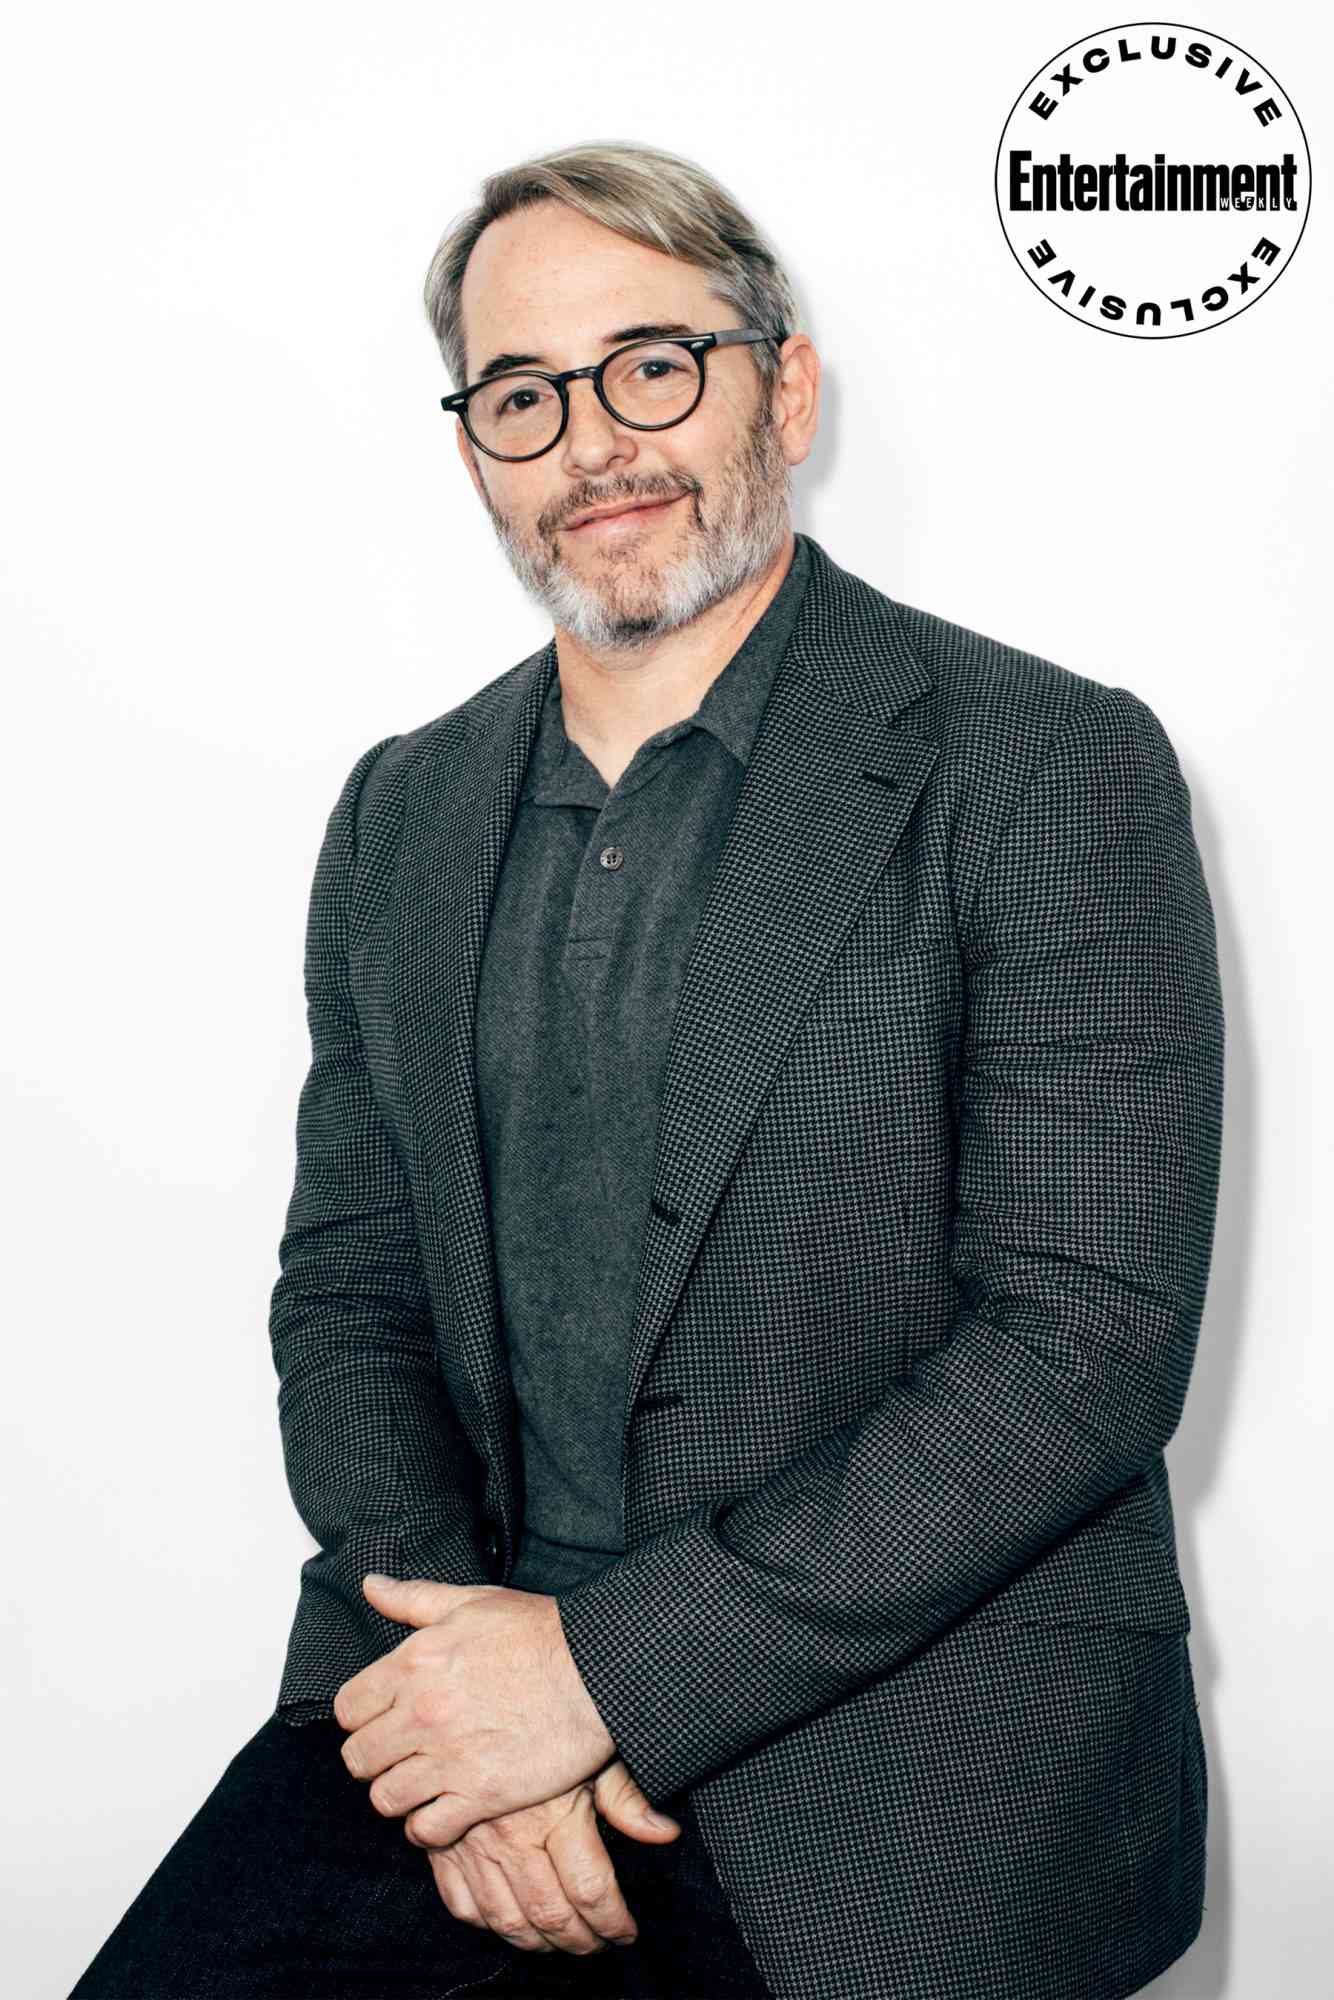 Matthew Broderick from Daybreak photographed at New York Comic Con 2019 by Ben Ritter for Entertainment Weekly. Credit: Ben Ritter for EW